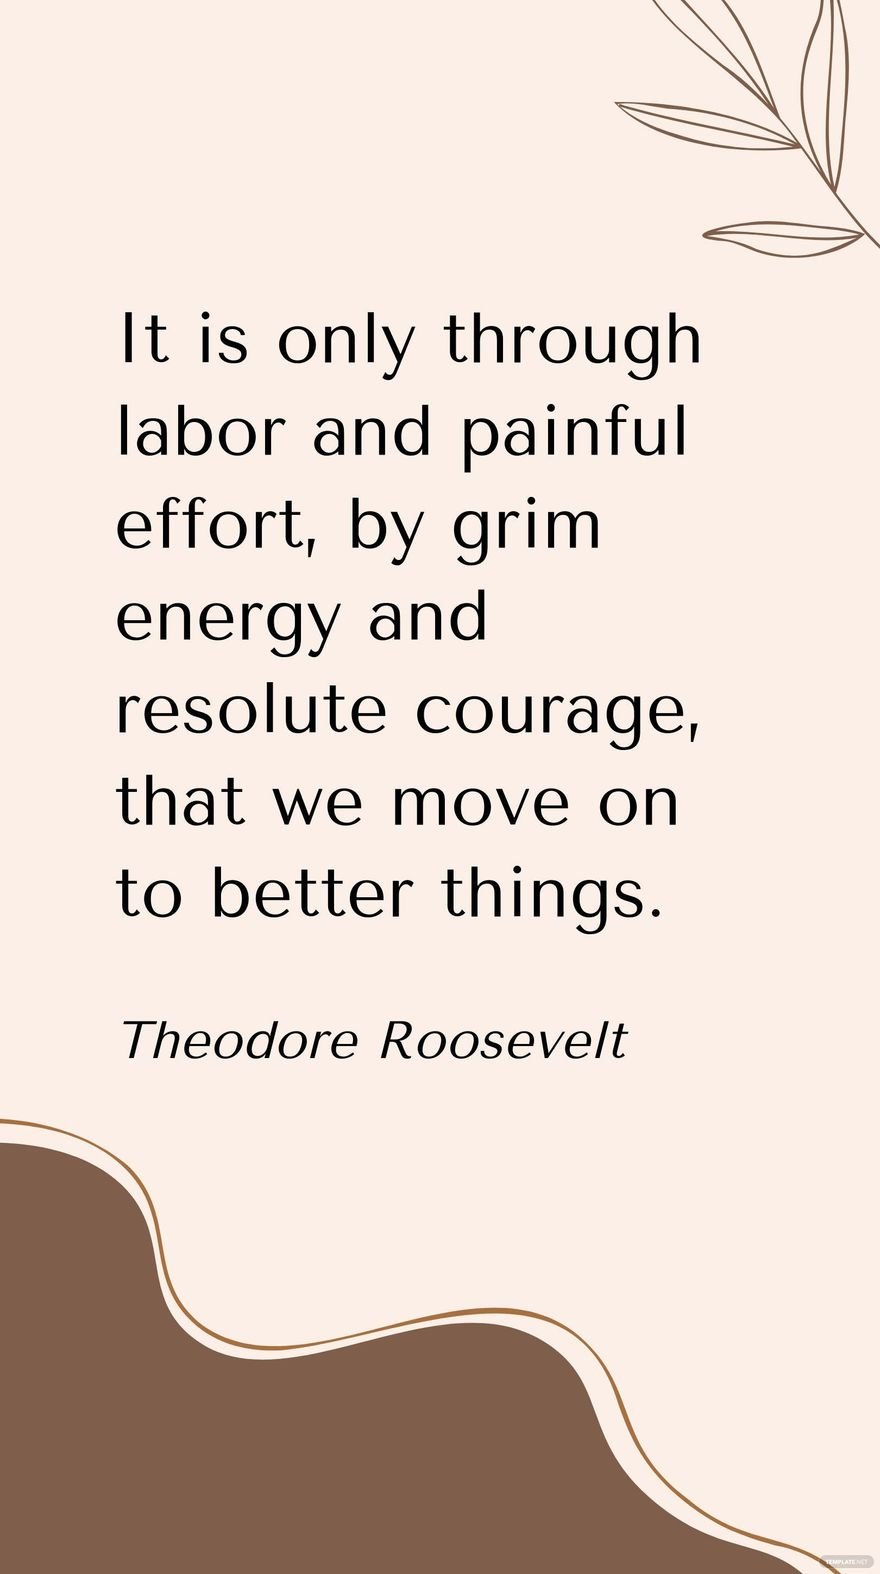 Free Theodore Roosevelt - It is only through labor and painful effort, by grim energy and resolute courage, that we move on to better things. in JPG